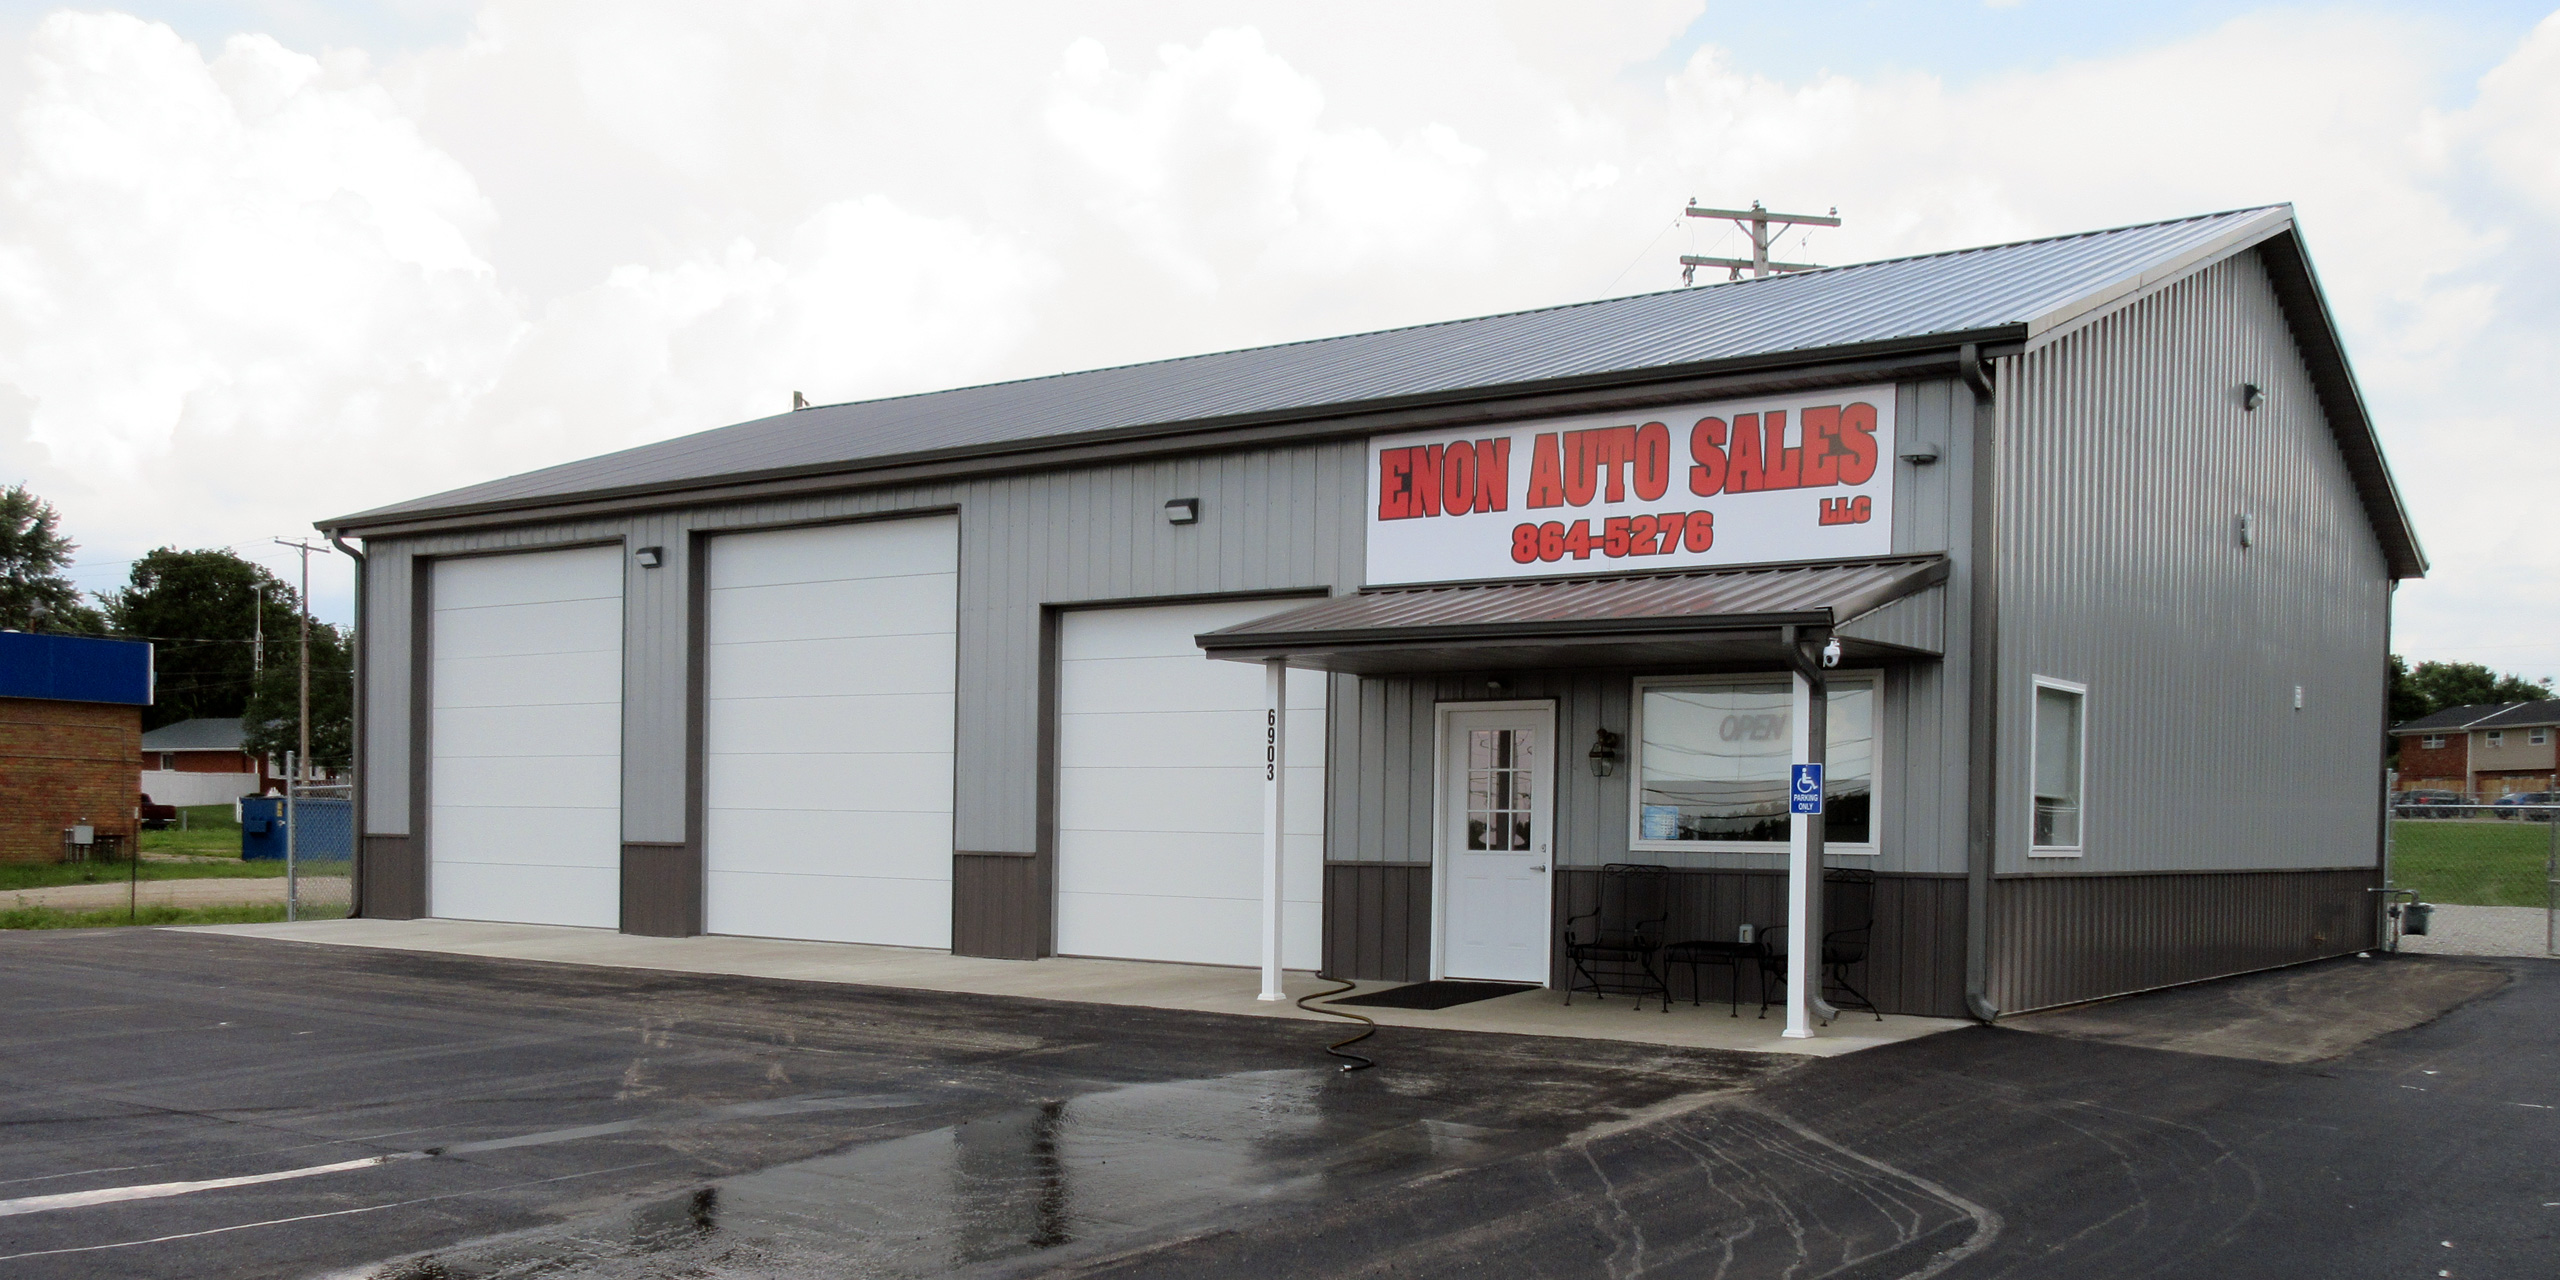 Commercial & Residential constructions - Dayton, Ohio